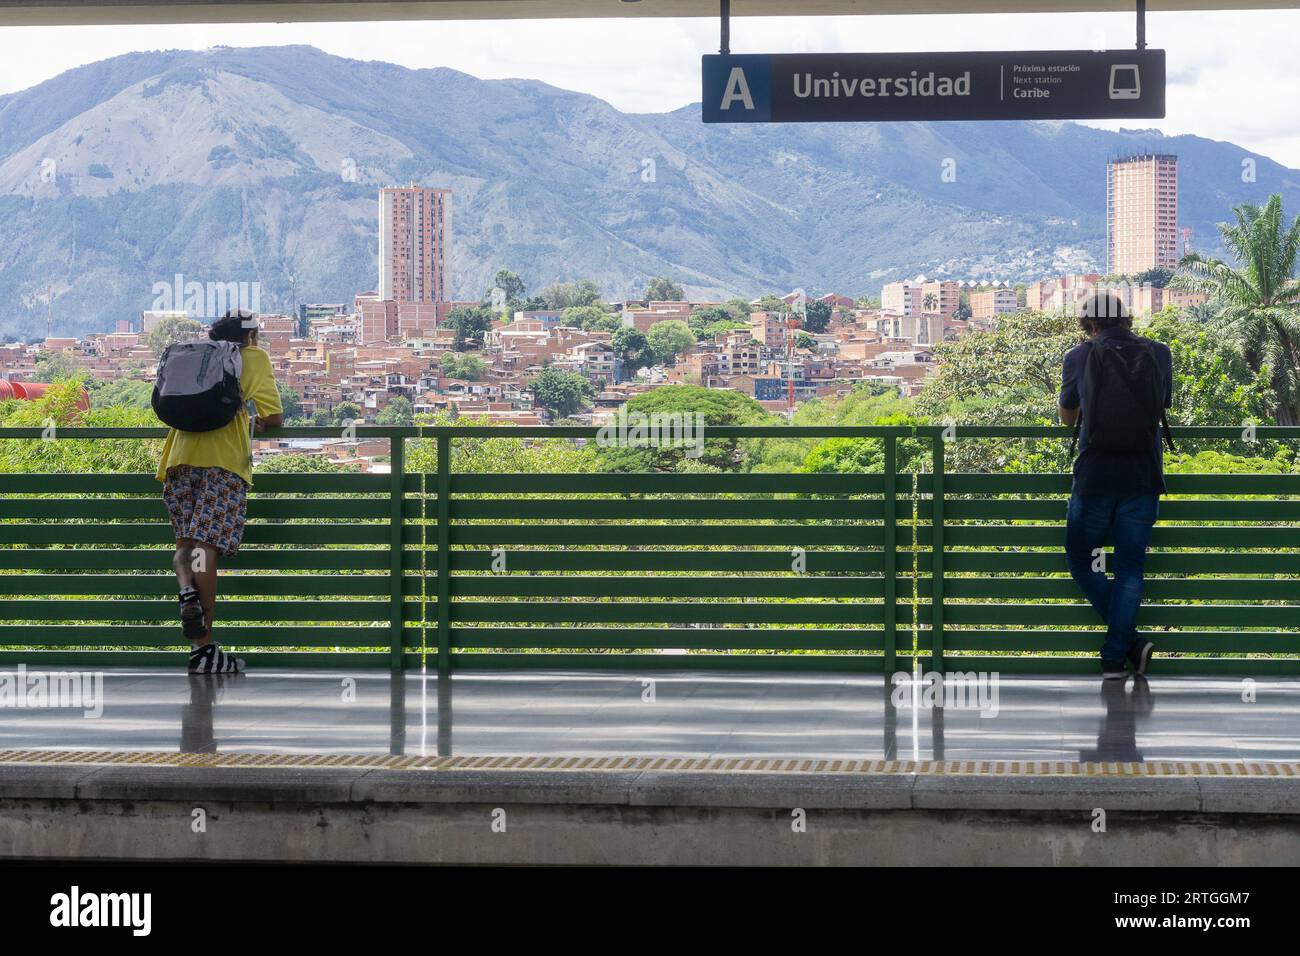 Medellin cityscape seen from the Universidad metro station in Medellin, Antioquia, Colombia Stock Photo